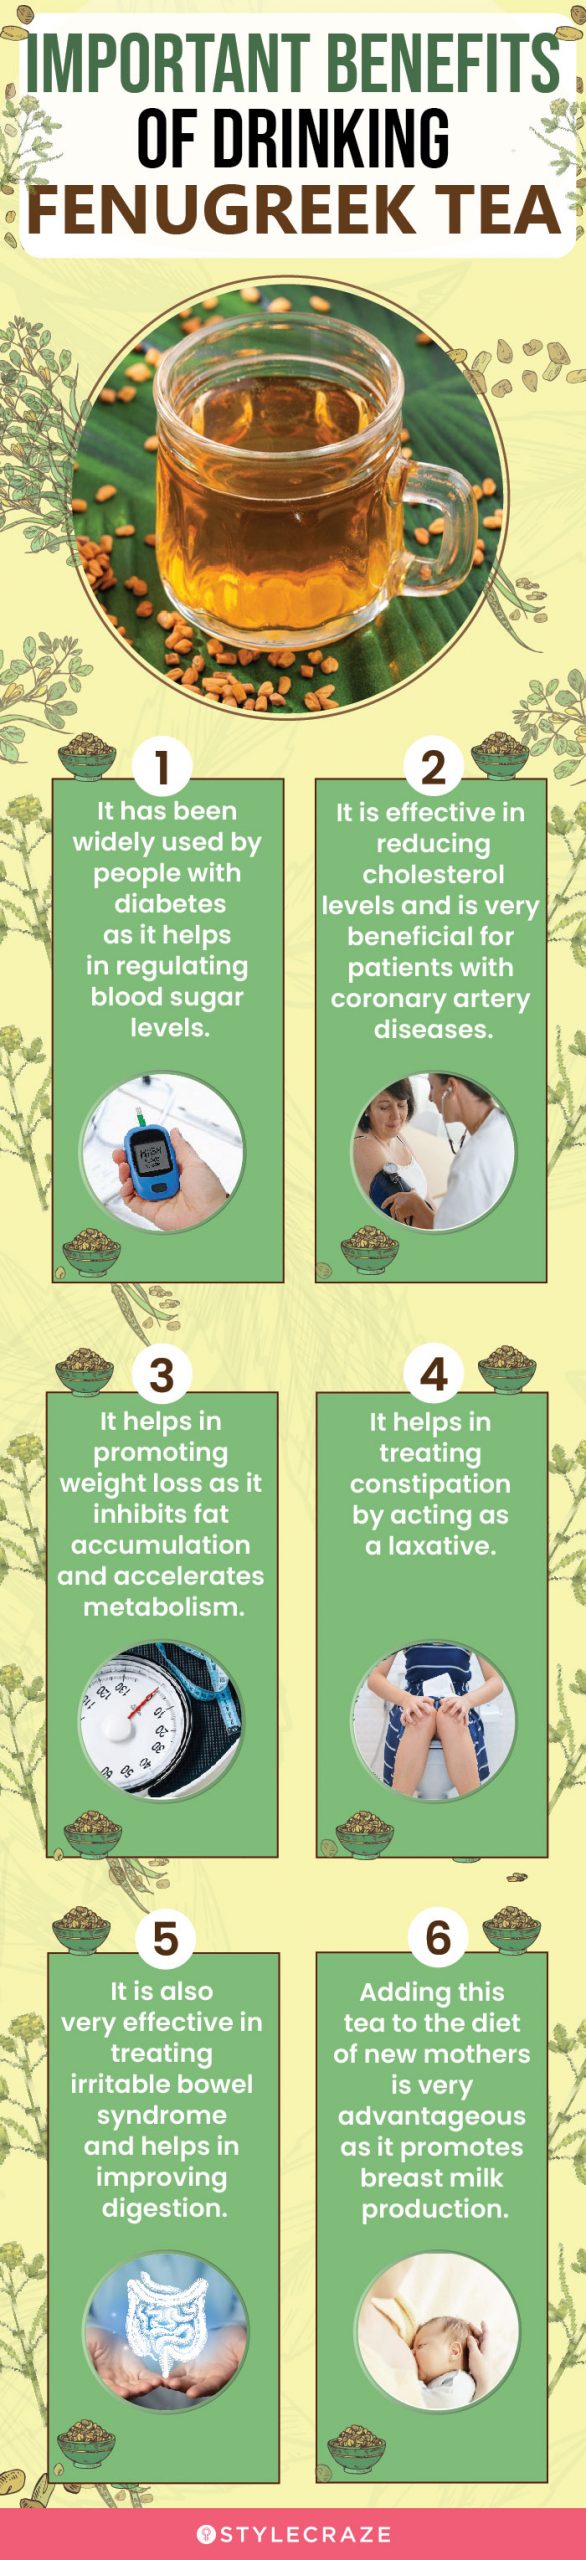 important benefts of drinking fenugreek tea [infographic]